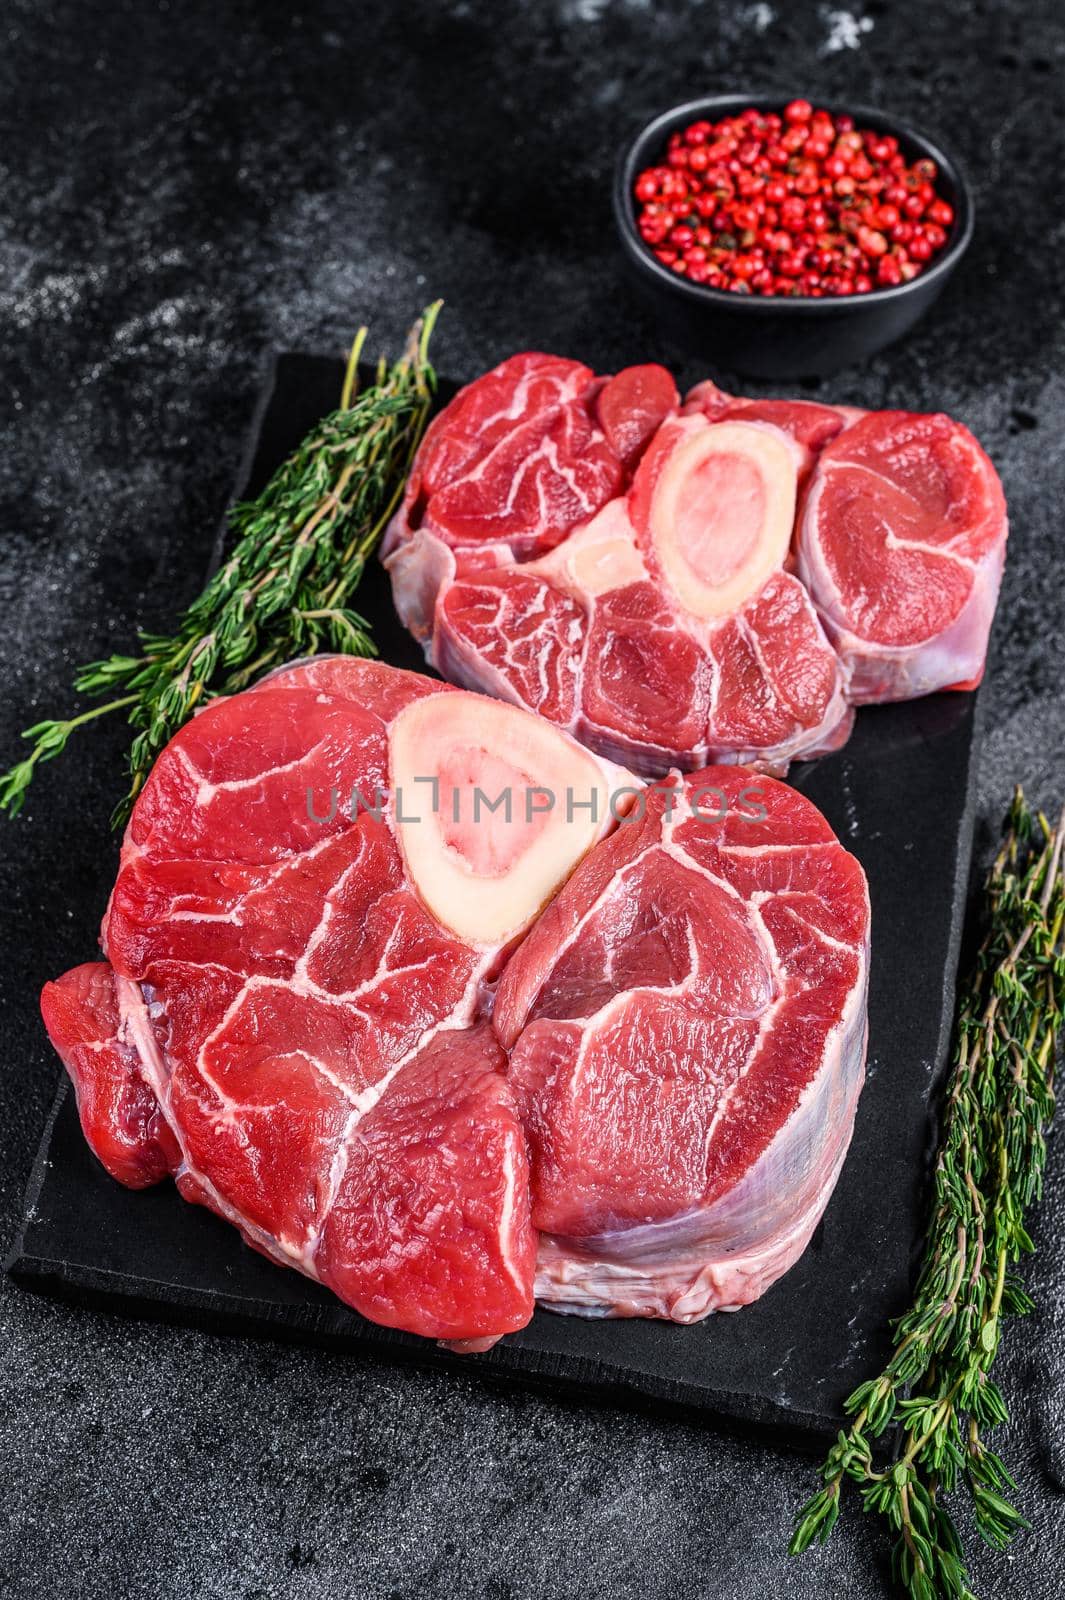 Raw beef meat osso buco shank steak, italian ossobuco. Black background. Top view.